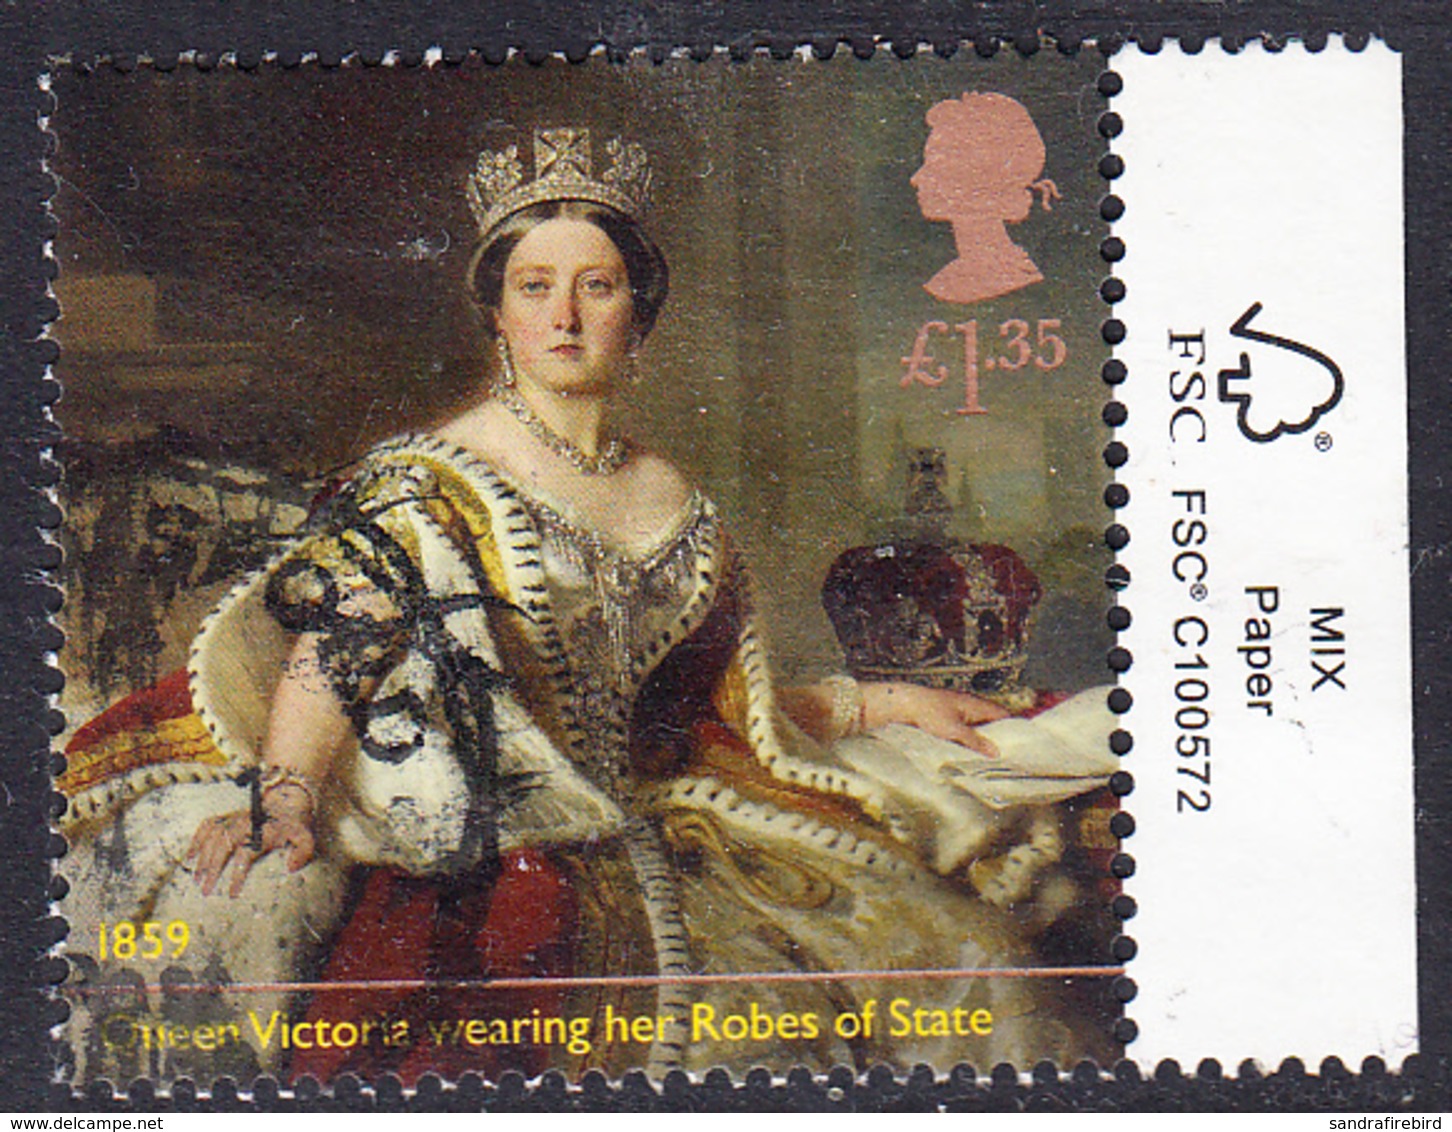 Bicentenary Of Birth Of Queen Victoria (2019) - Queen Victoria In Robes Of State £1.35 SG4222 - Used Stamps